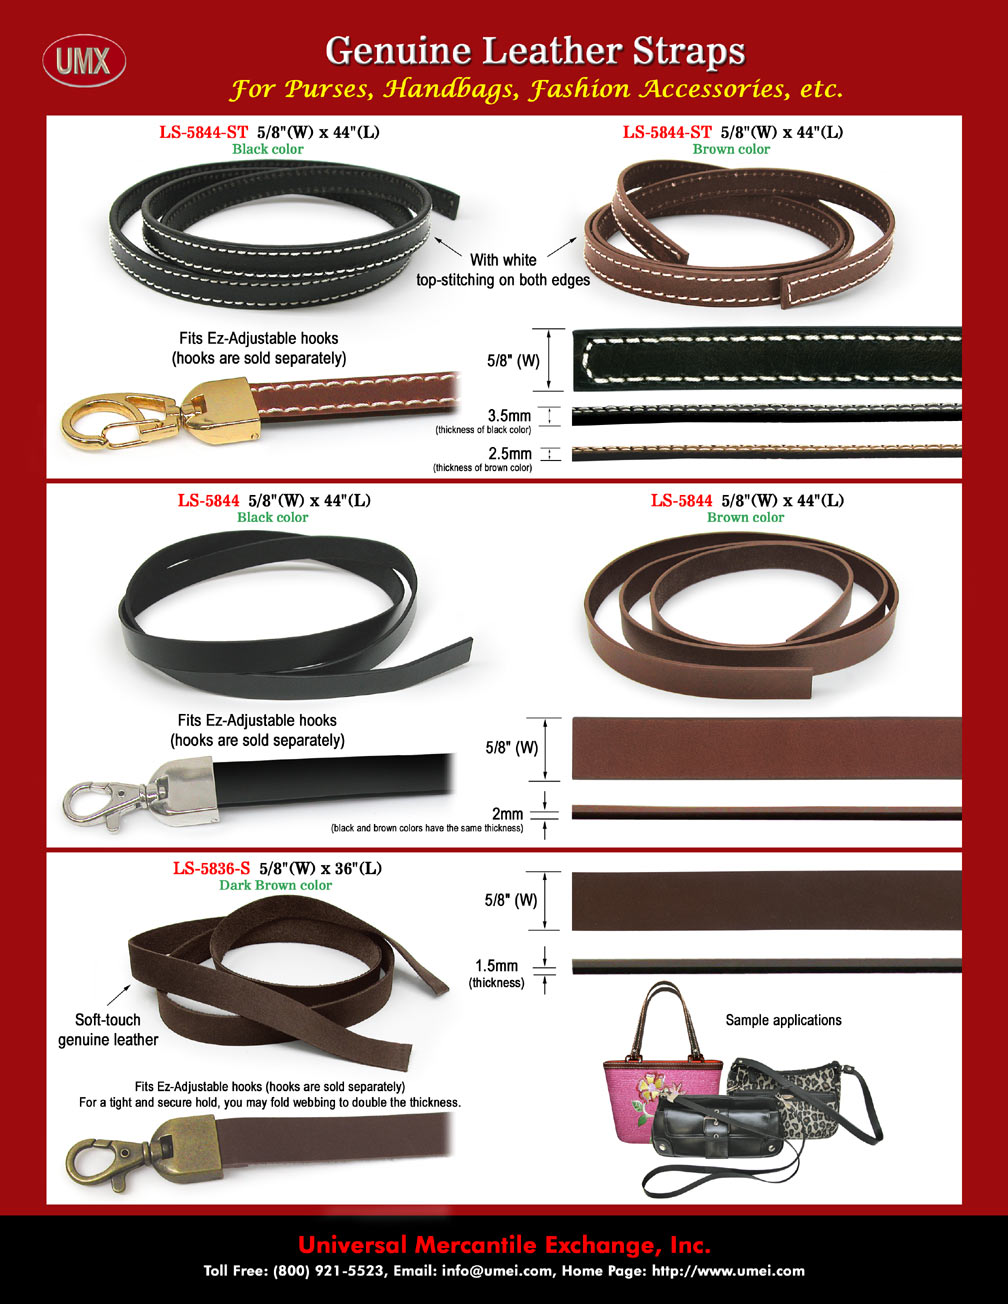 The leather straps are great for purse, handbag, cigar box or jewelry box's leather handles.